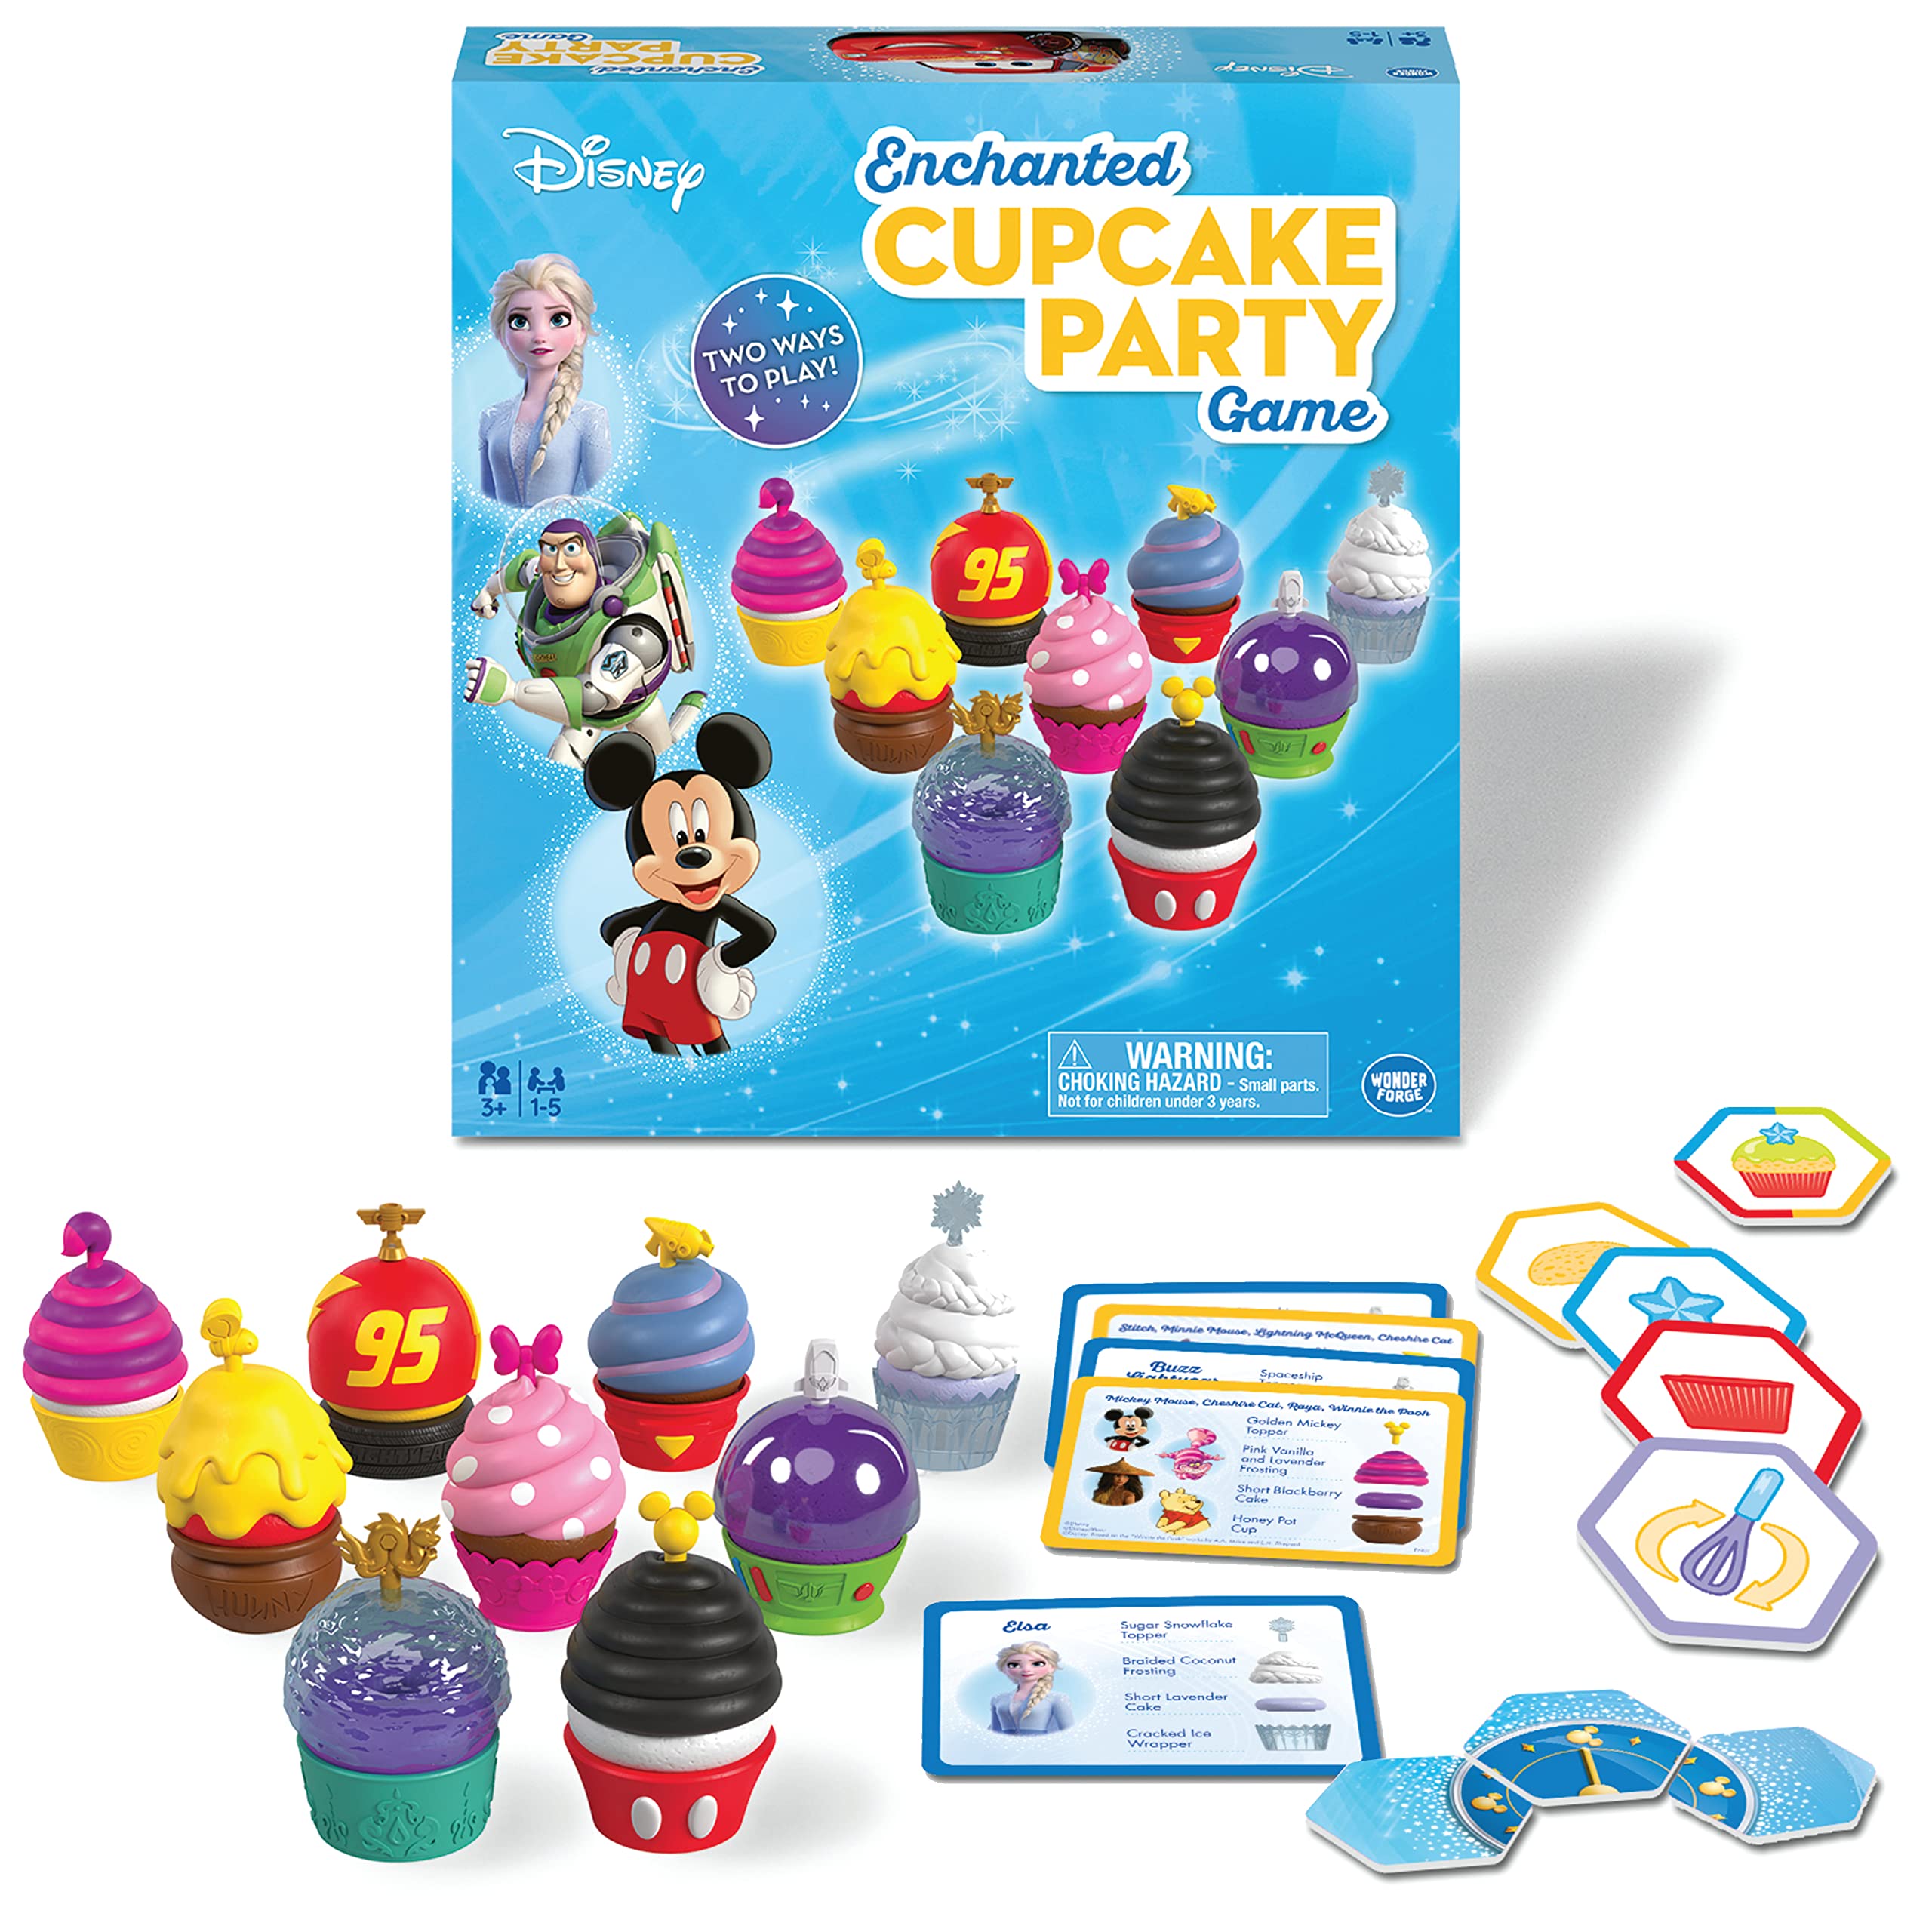 Wonder Forge Disney Enchanted Cupcake Party Game for Girls & Boys Age 3 & Up - A Fun & Fast Matching Game You Can Play Over & Over